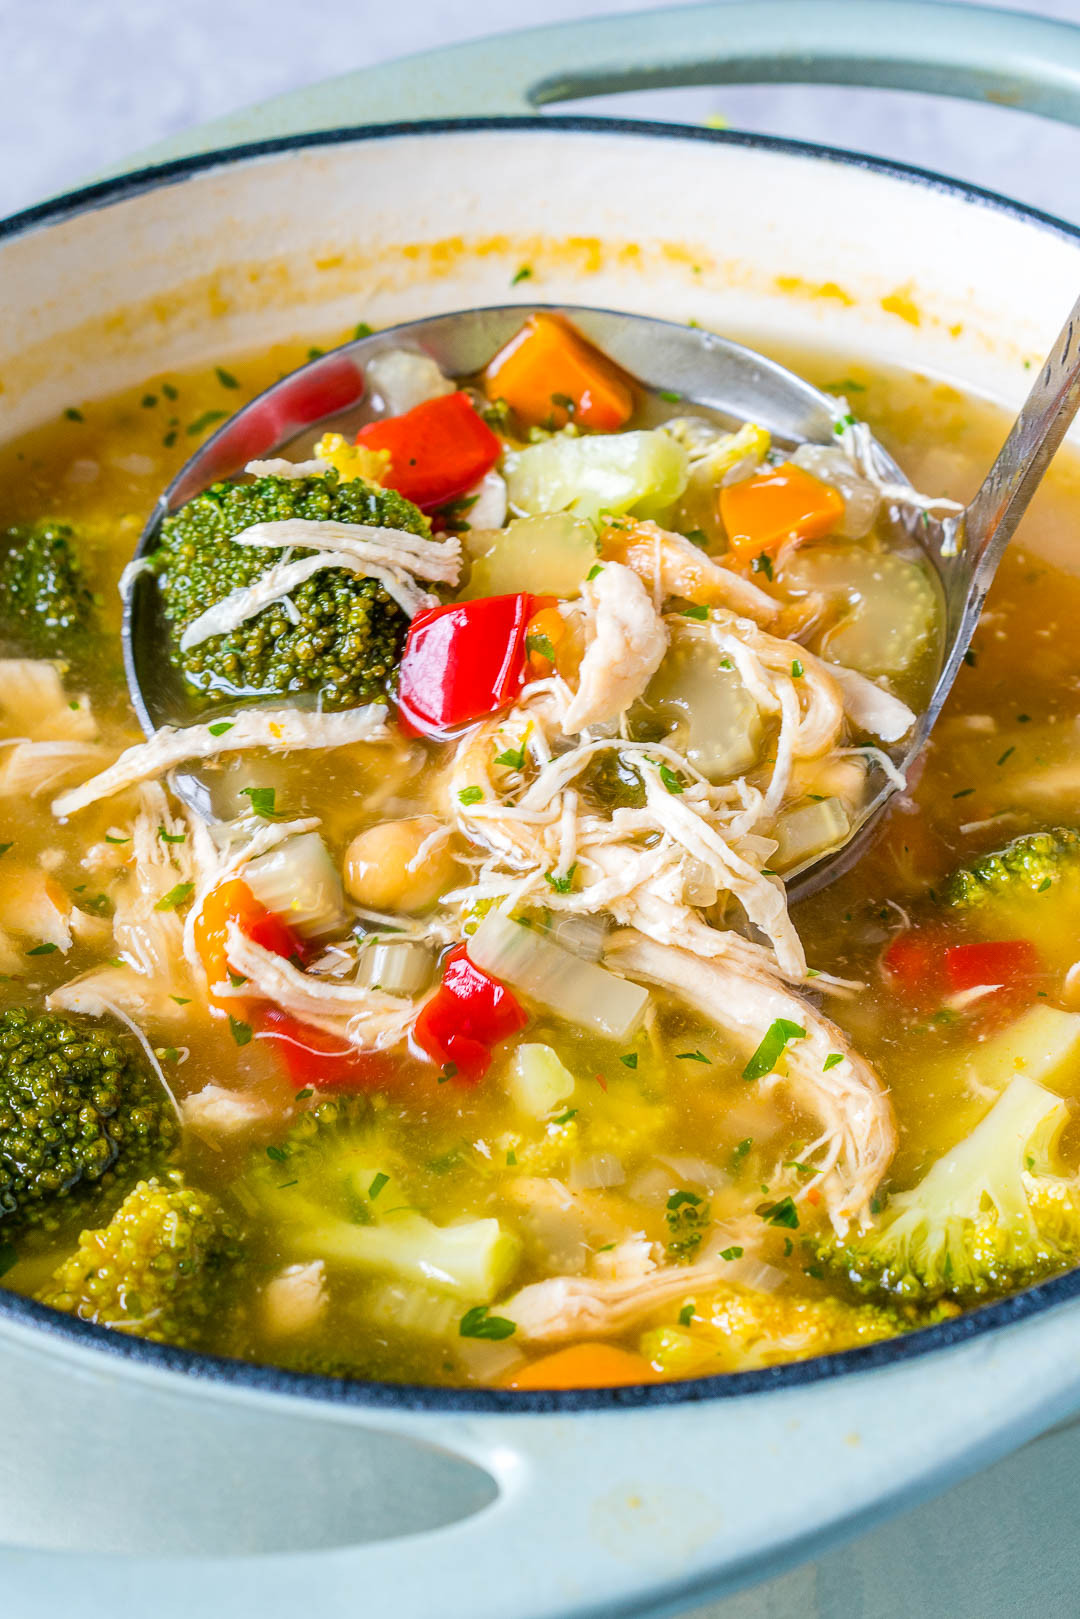 Clean Eating Soup
 Eat this Detox Soup to Lower Inflammation and Shed Water